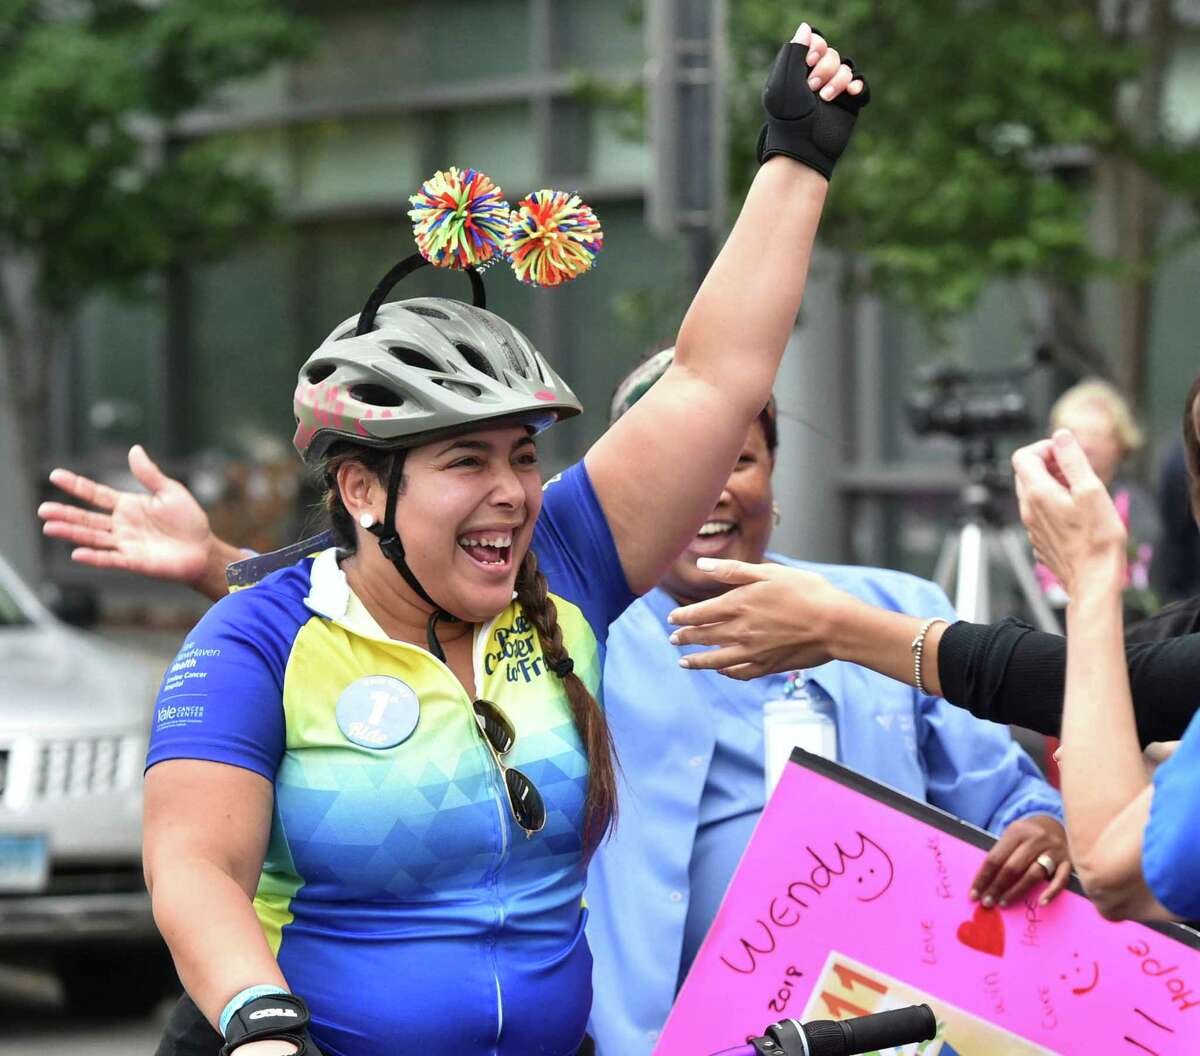 New Haven, Connecticut -Saturday, September 8, 2018: Over 1,800 bicyclists participate in the 8th Annual Closer to Free Ride fundraiser to benefit Smilow Cancer Hospital at Yale New Haven. Starting at Yale Bowl in New Haven to the YNHH Smilow Cancer Center in New Haven for the "Smilow Salute", the bicyclists then take one of five professionally-designed and fully supported routes based on the different skill levels of the riders. One hundred percent of the funds raised by riders will go to research and care at Smilow Cancer Hospital and Yale Cancer Center. One hundred percent of the funds raised by riders will go to research and care at Smilow Cancer Hospital and Yale Cancer Center. Riders return to Yale Bowl to the Finish Line Festival fun that offers live music, family activities, massage, a Food Truck Village and more. The routes take the riders through towns like Branford, Chester, Clinton, Deep River, Durham, Essex, Hamden, Guilford, Madison, Wallingford, Branford, North Haven, Old Saybrook and Westbrook.